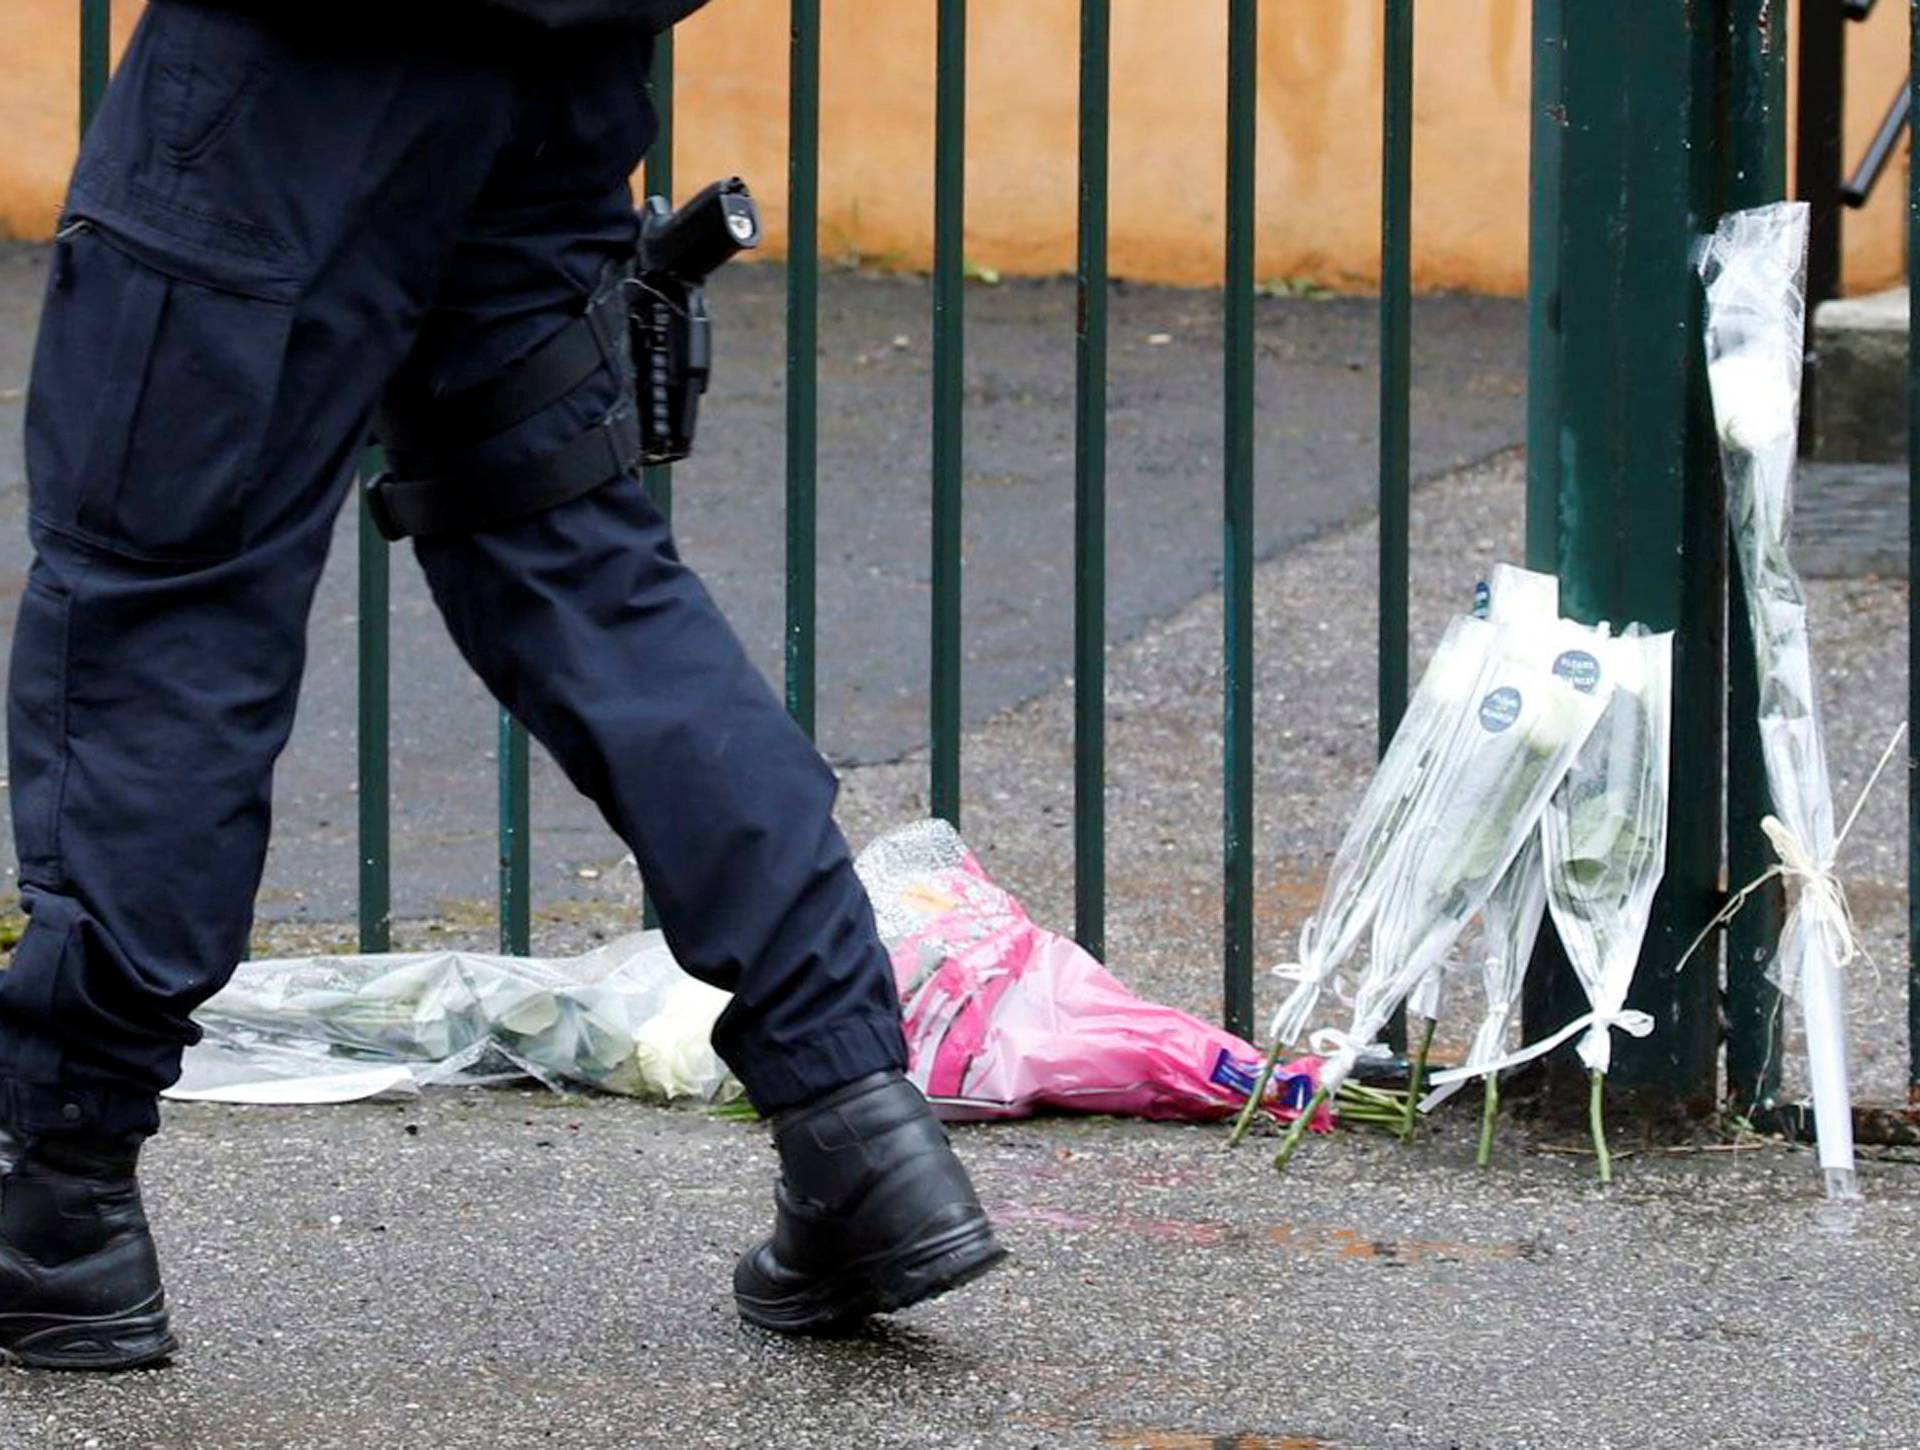 Flowers and messages in tribute to the victim are seen in front of the Gendarmerie of Carcassonne